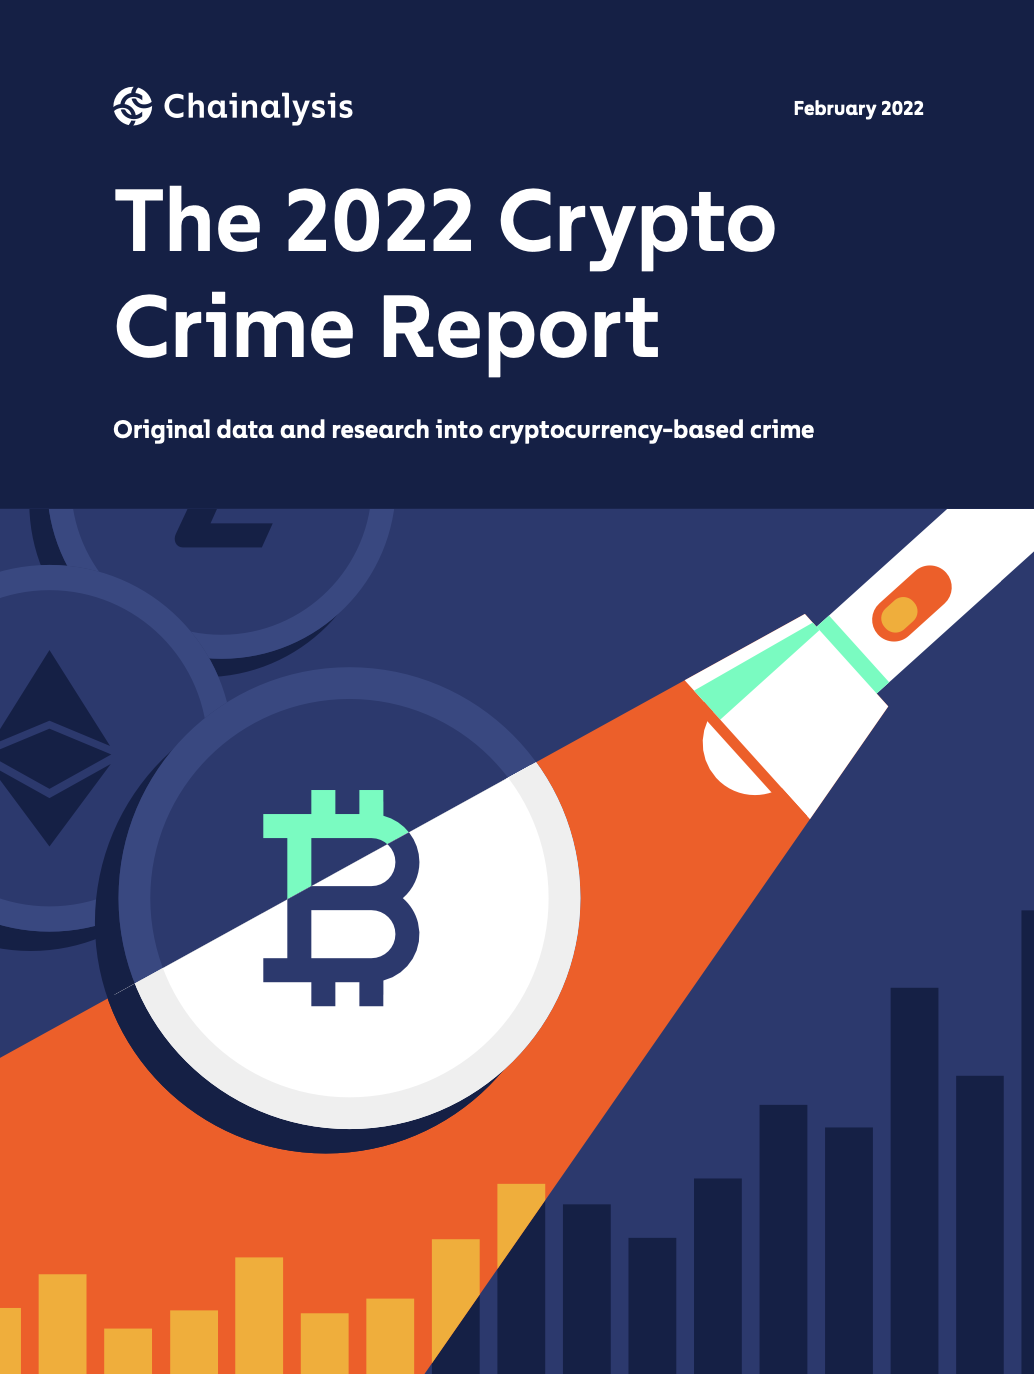 The Chainalysis 2022 Crypto Crime Report